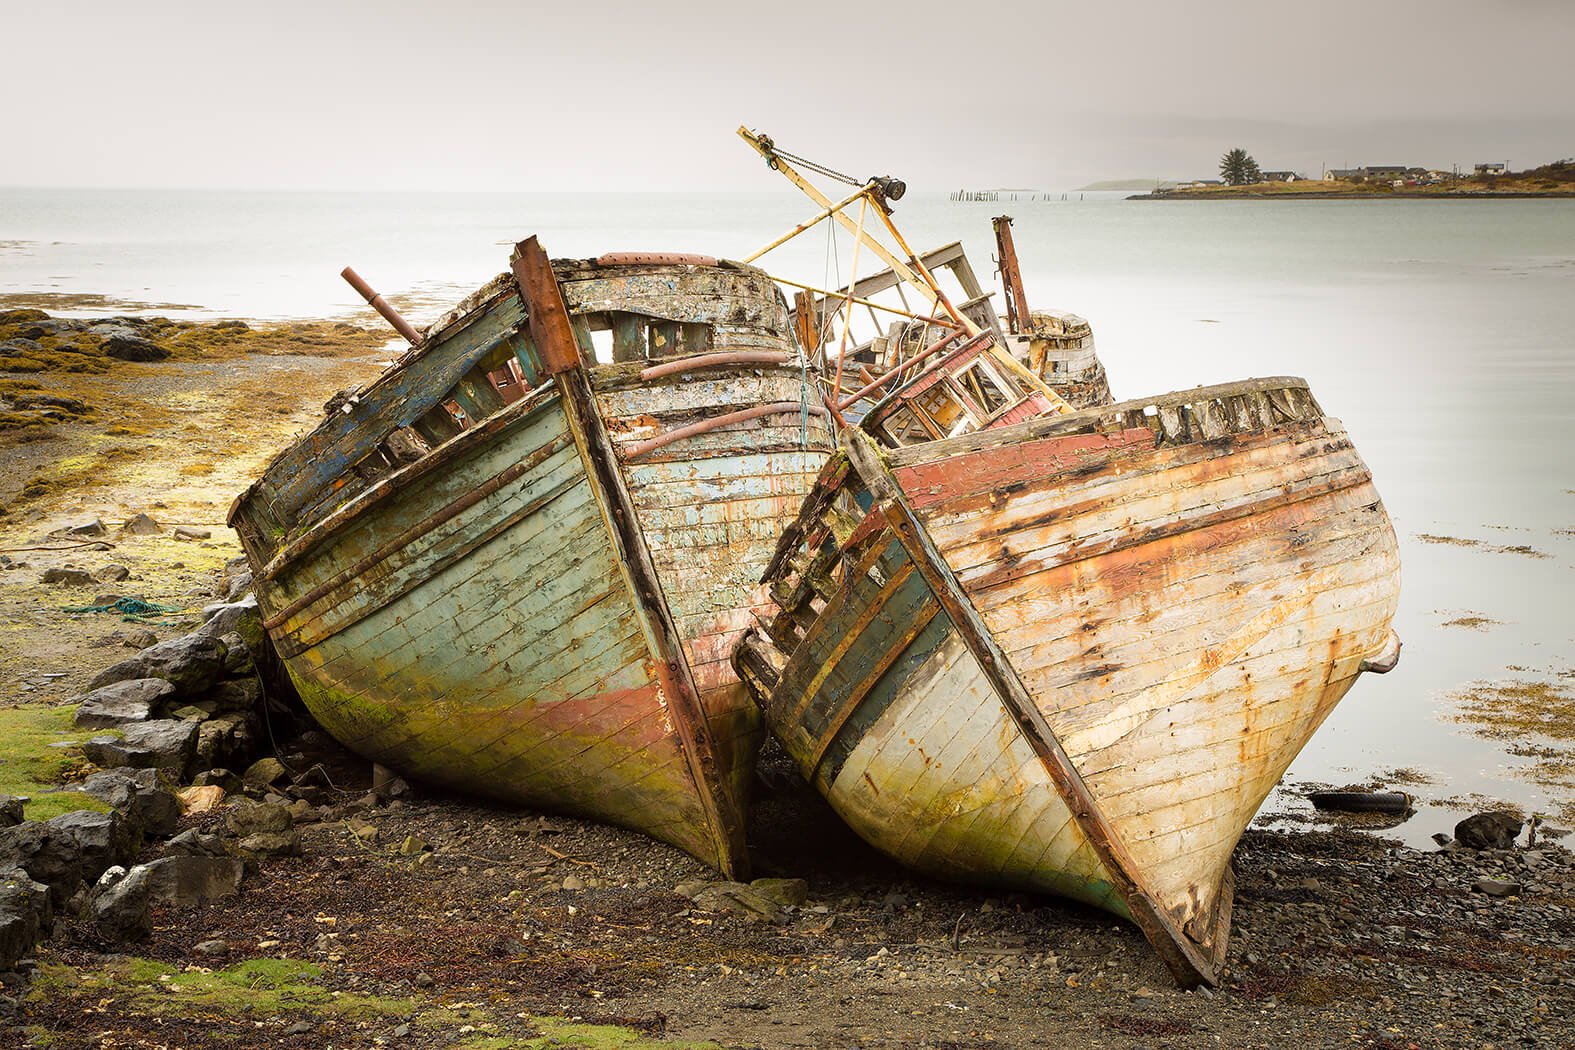 Wrecked fishing boats photographed on Natural World Photography Otters and Eagles wildlife photography tour to Mull